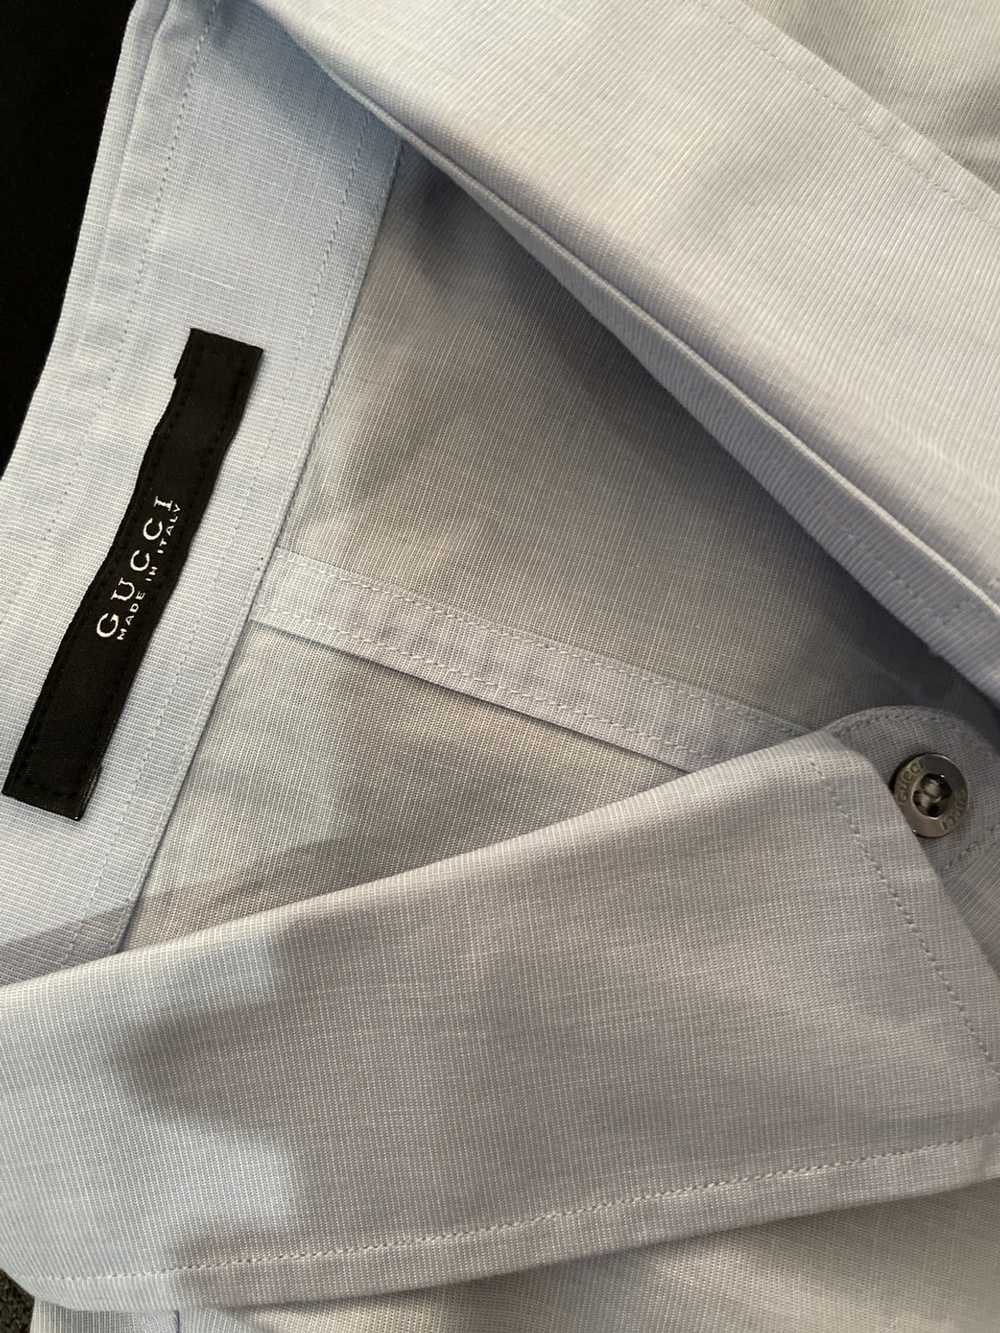 Gucci Gucci Shirt in Light Blue - image 3